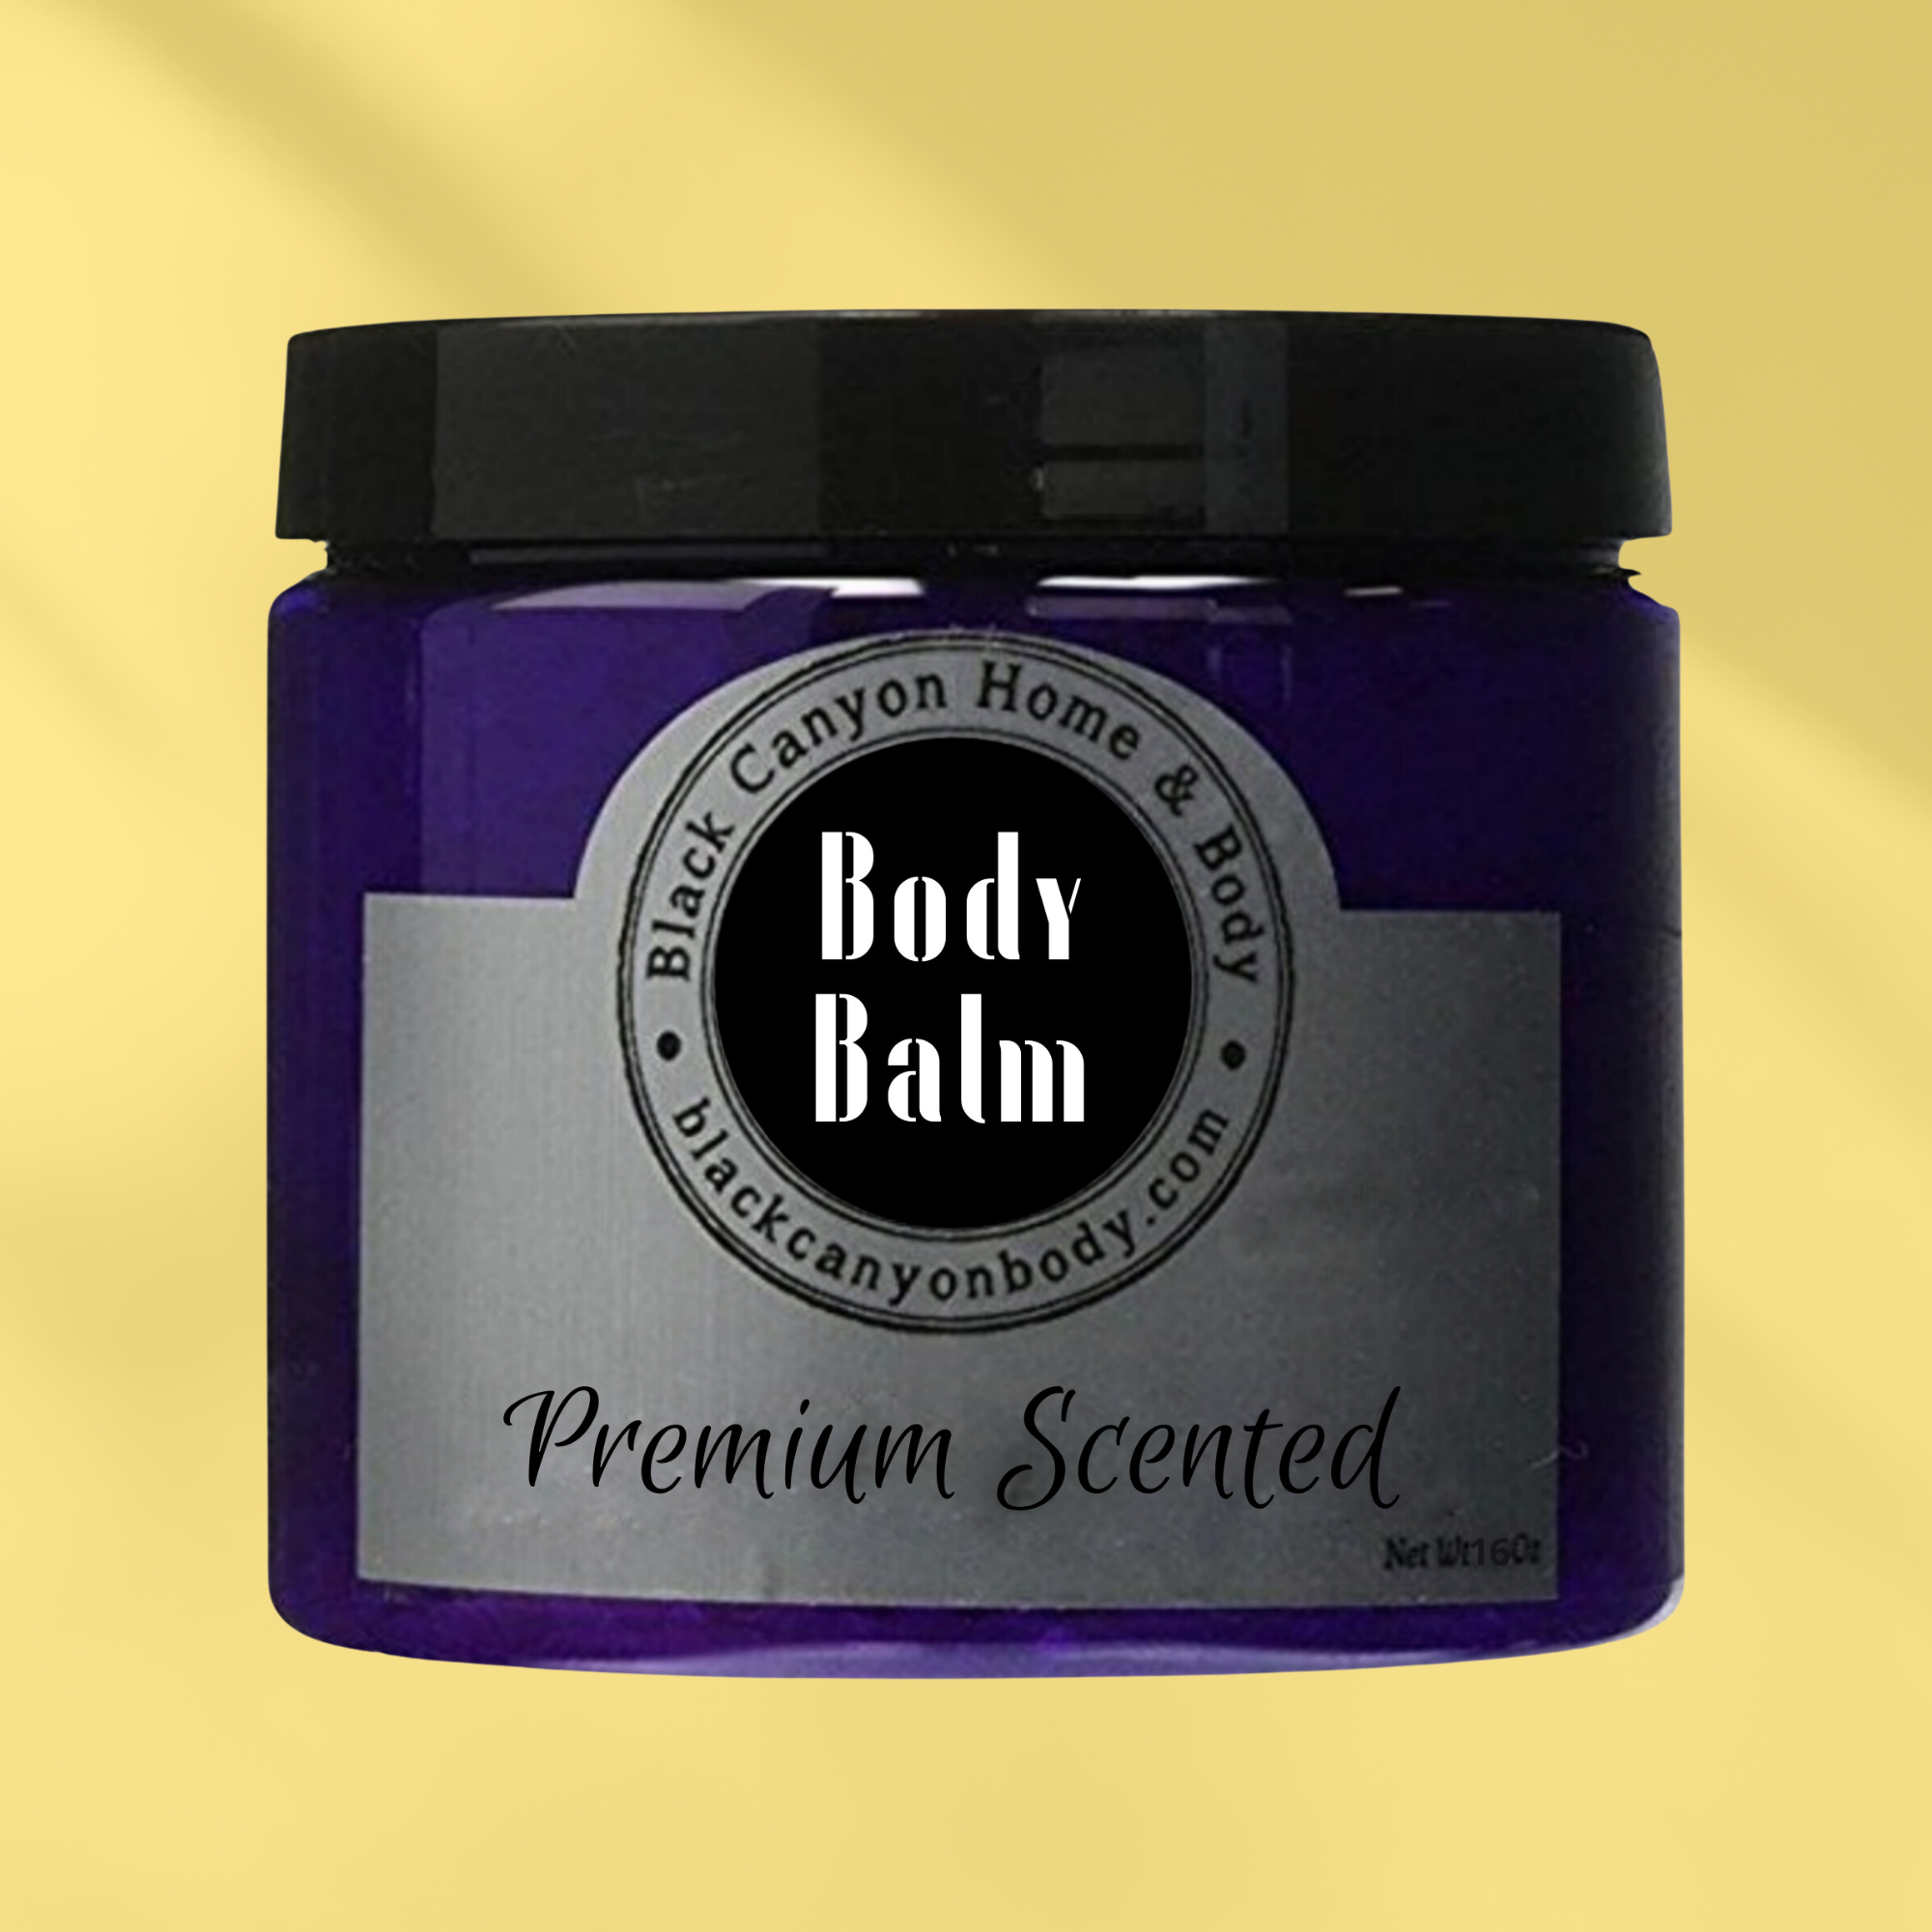 Paydens Cobalt New River Scented Natural Body Balm with Shea For Men